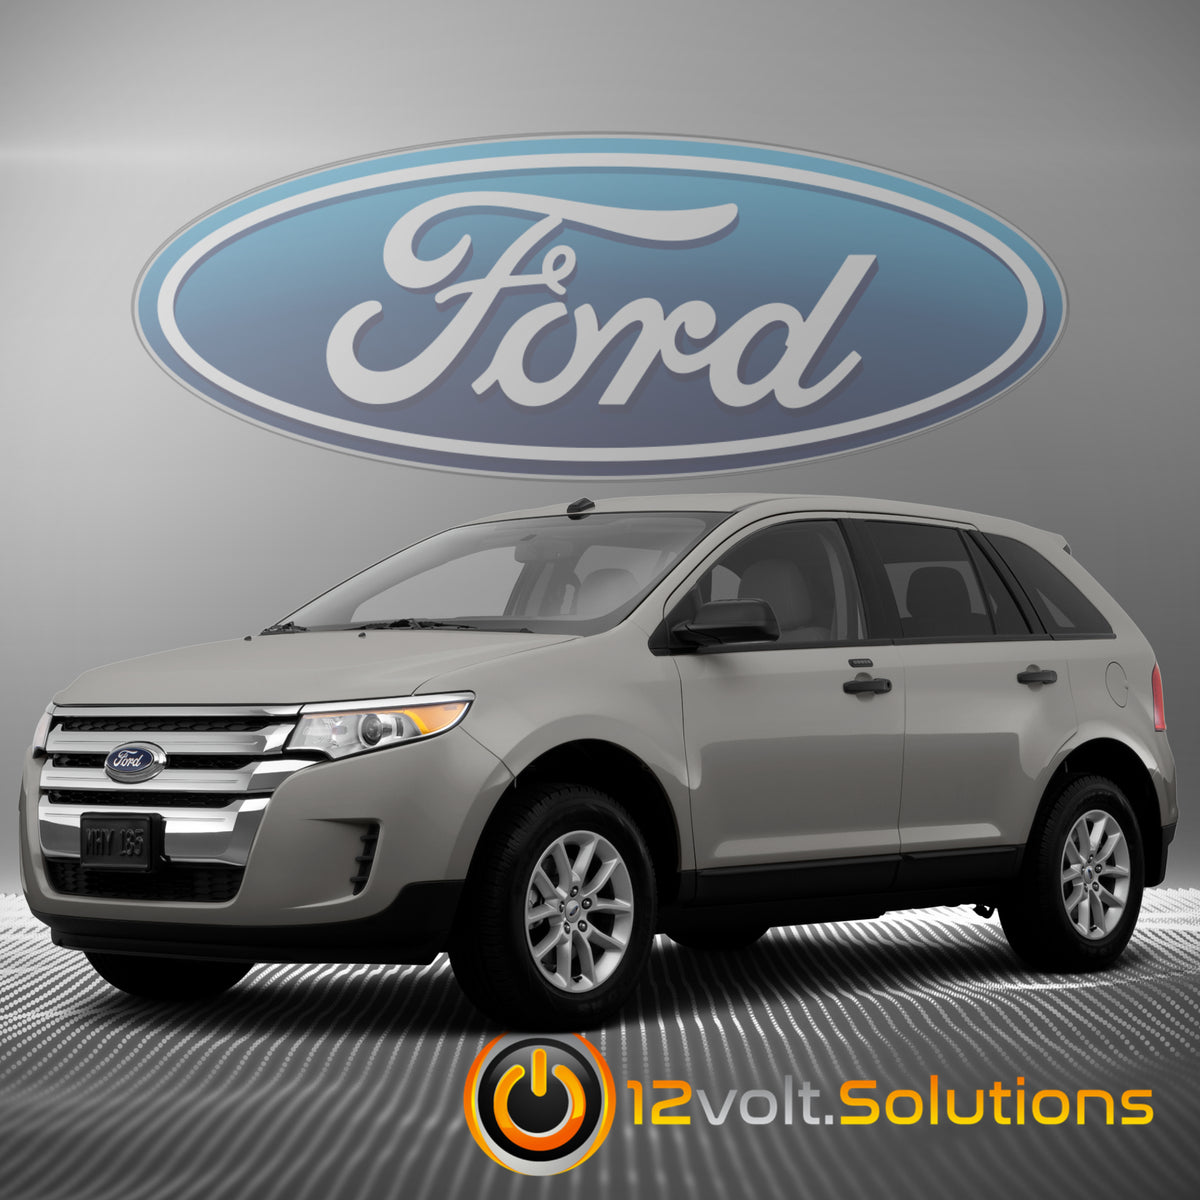 2011-2014 Ford Edge Remote Start Plug and Play Kit-12Volt.Solutions